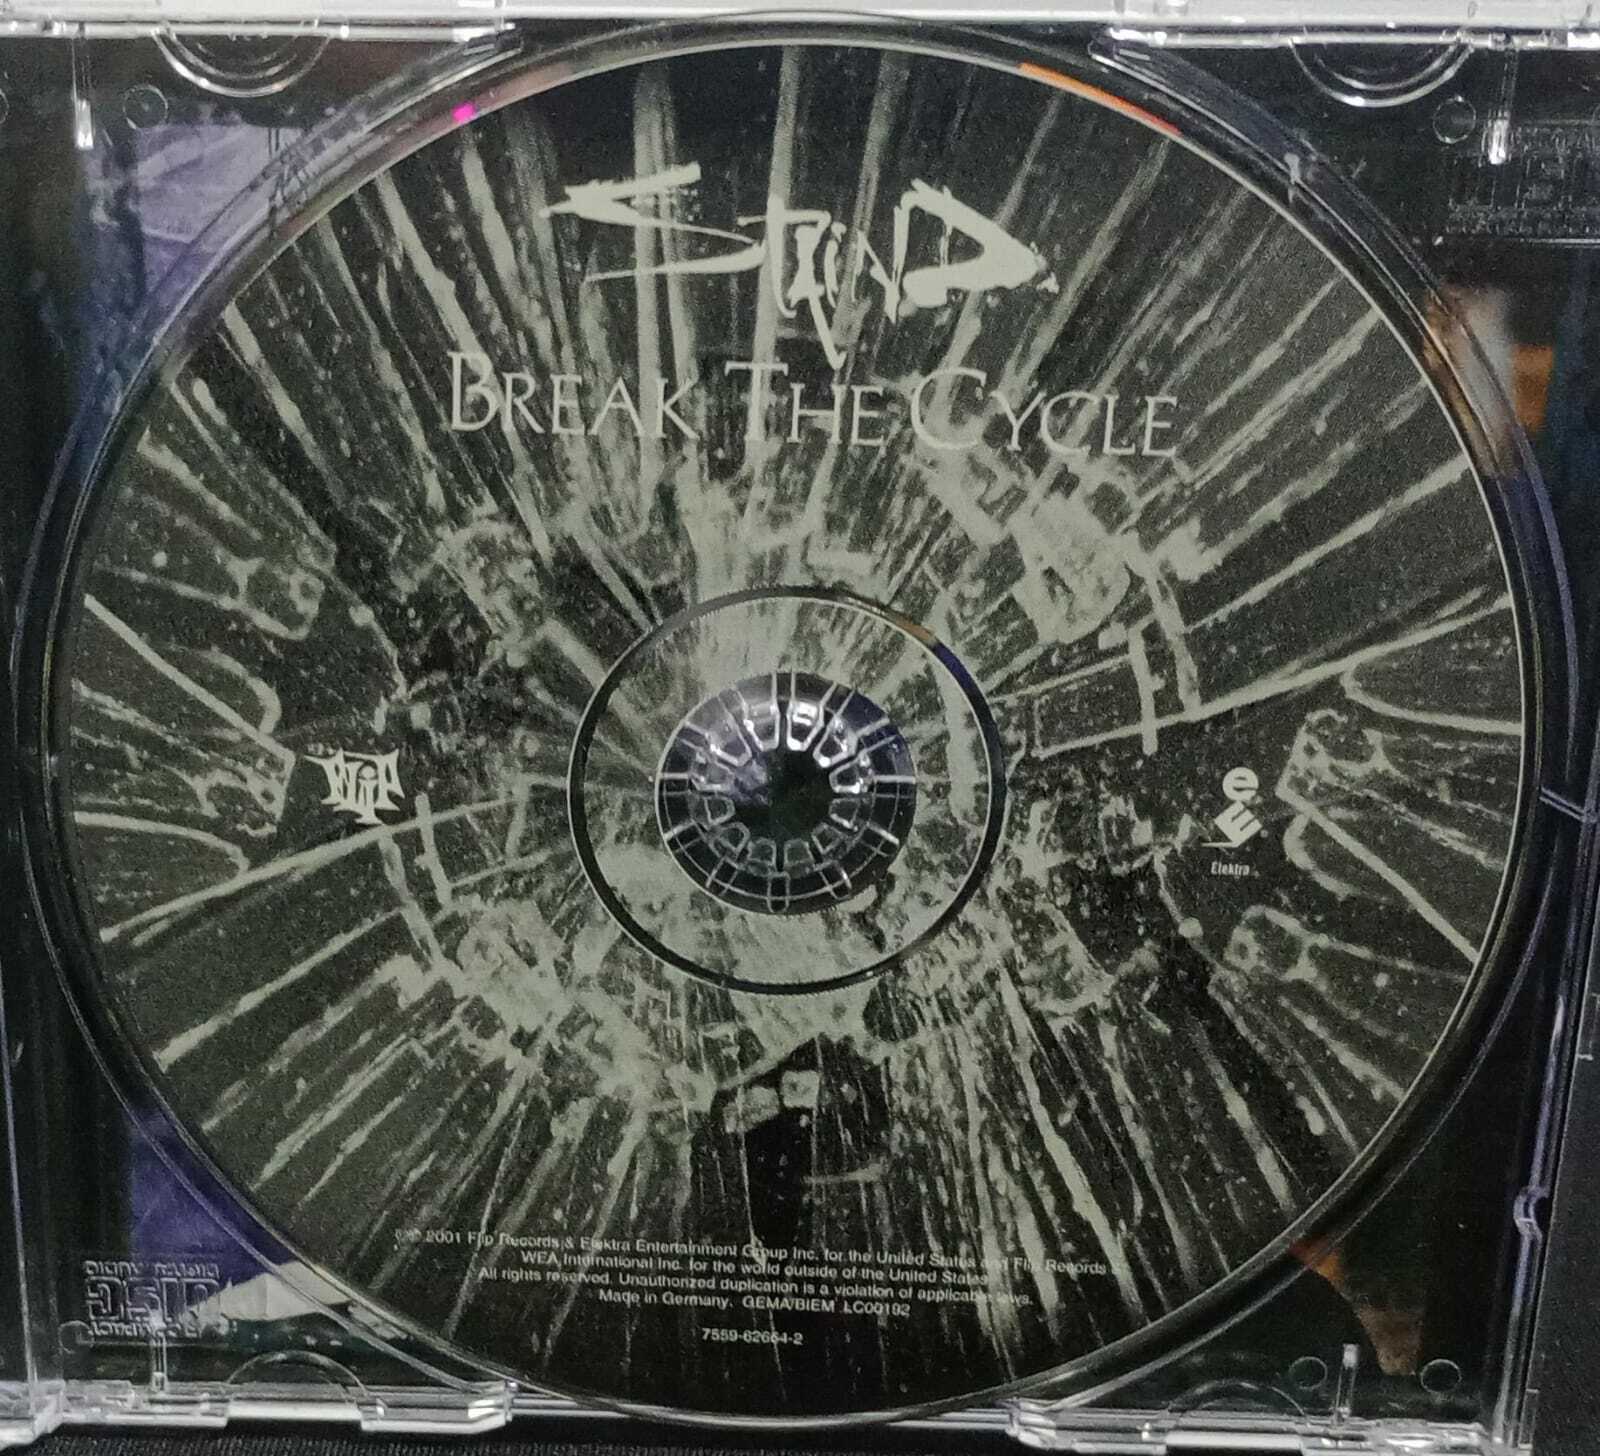 CD - Staind - Break The Cycle (Germany)